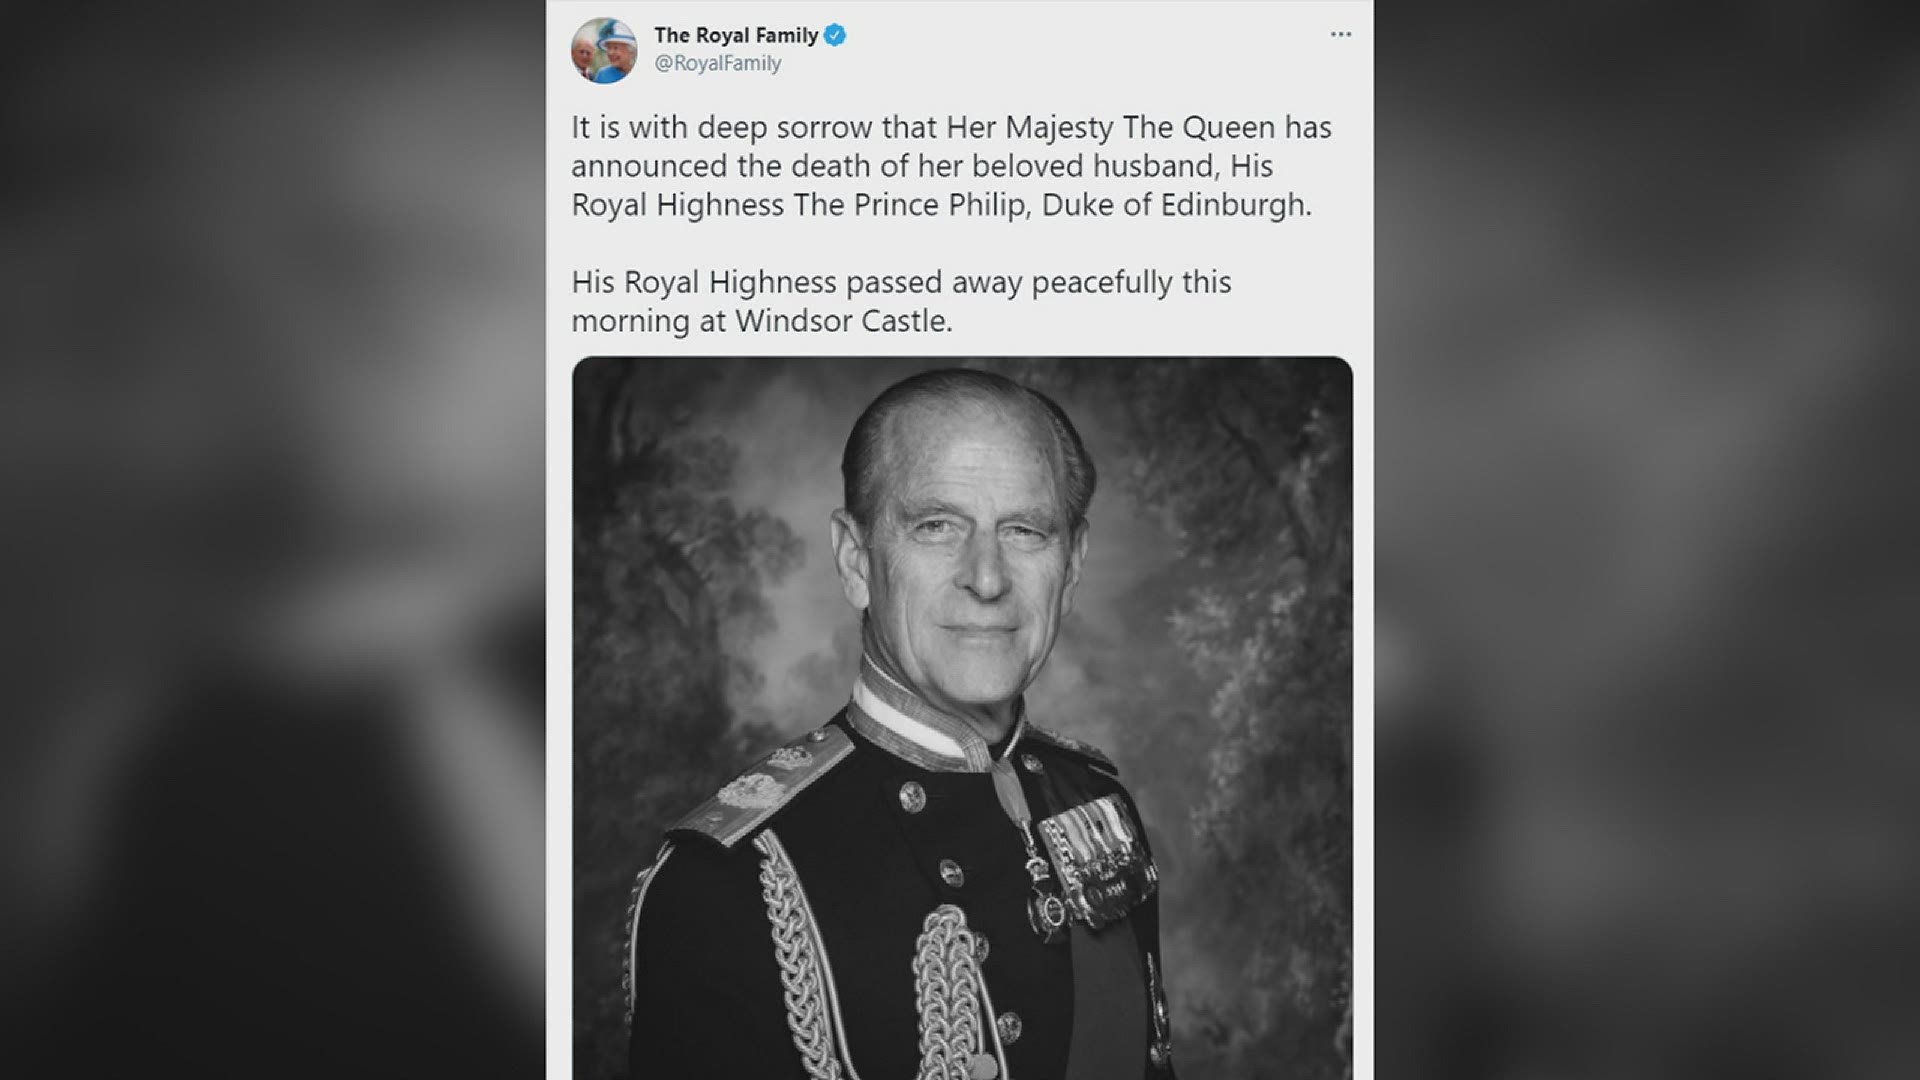 Prince Philip has passed away at age 99.